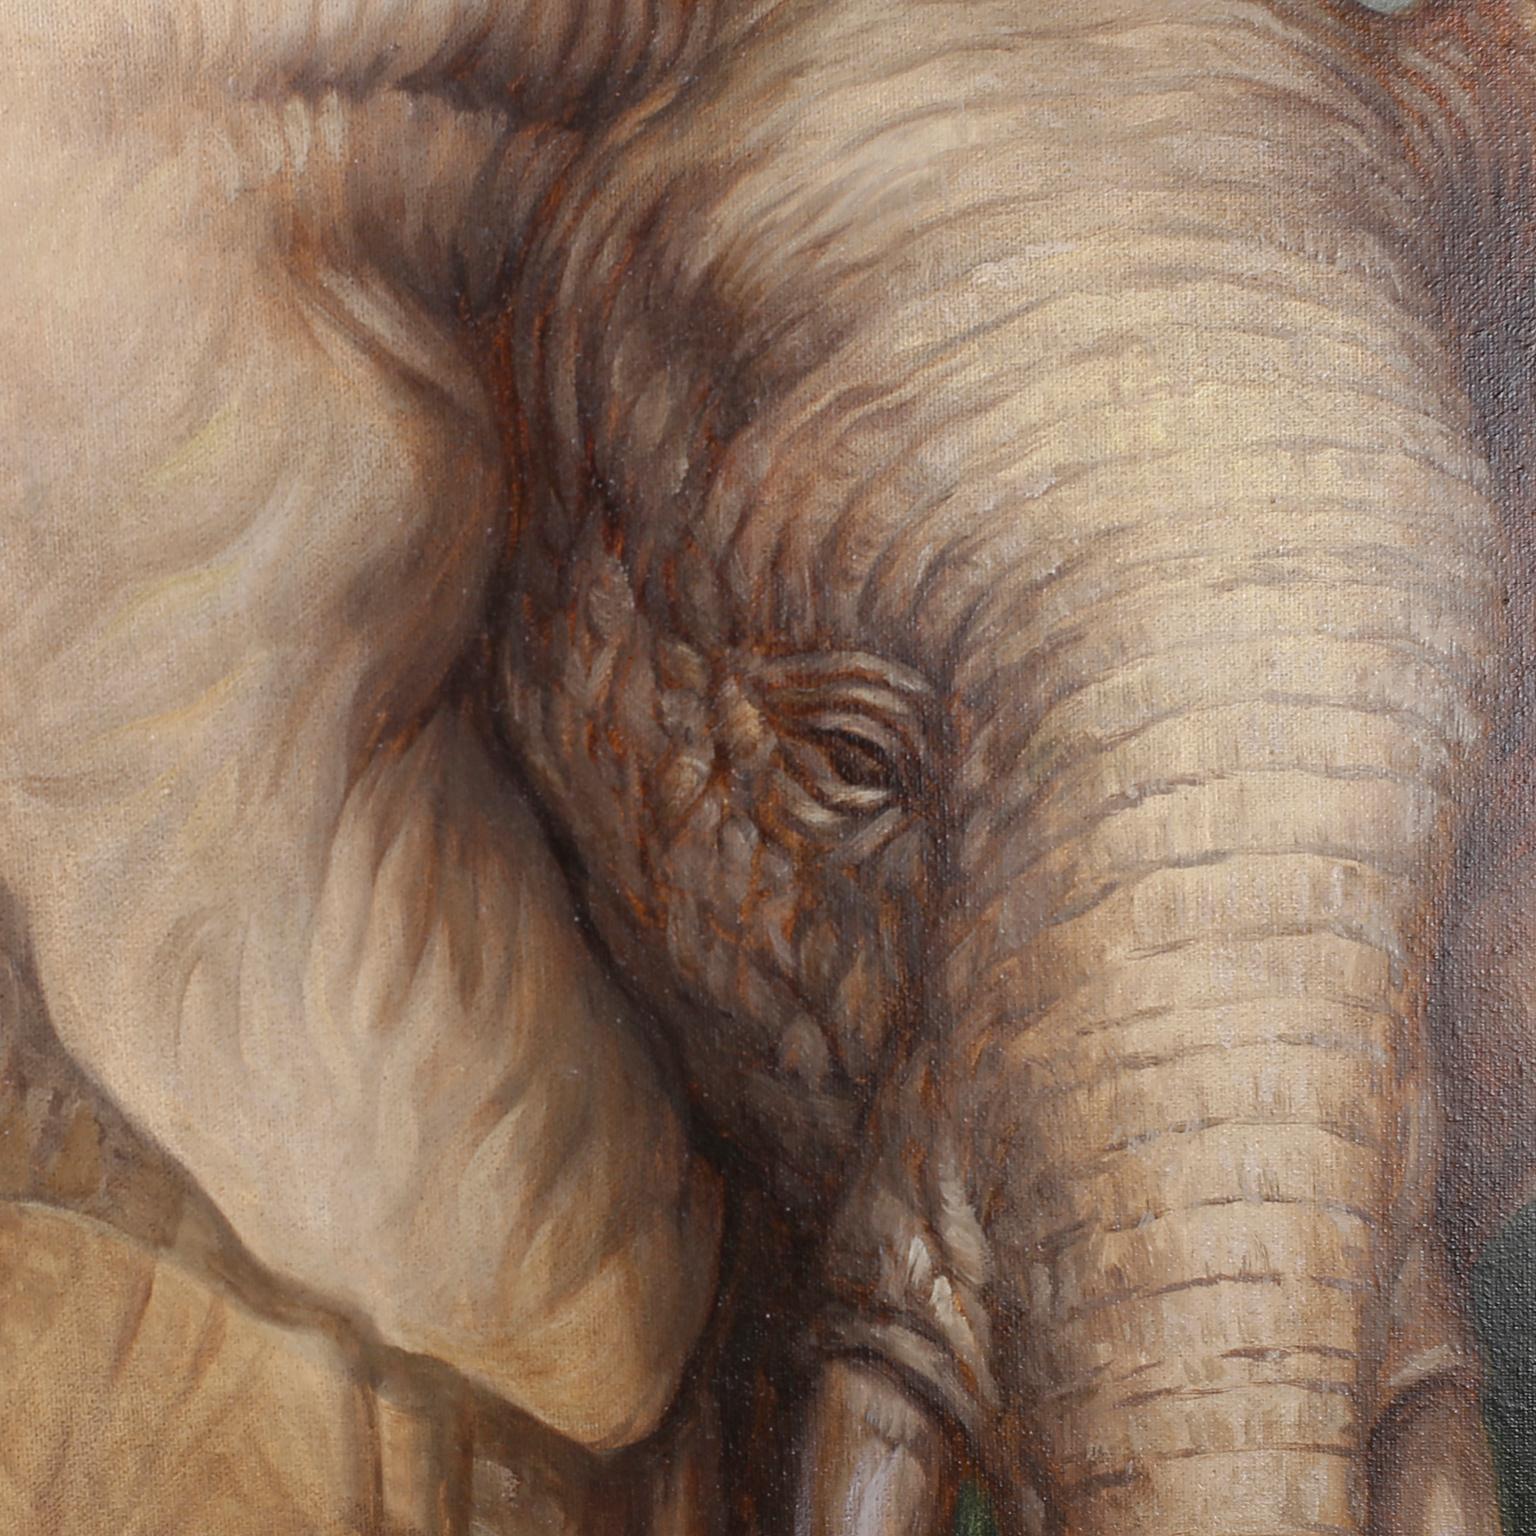 Large Oil Painting on Canvas of an Elephant and a Man 1